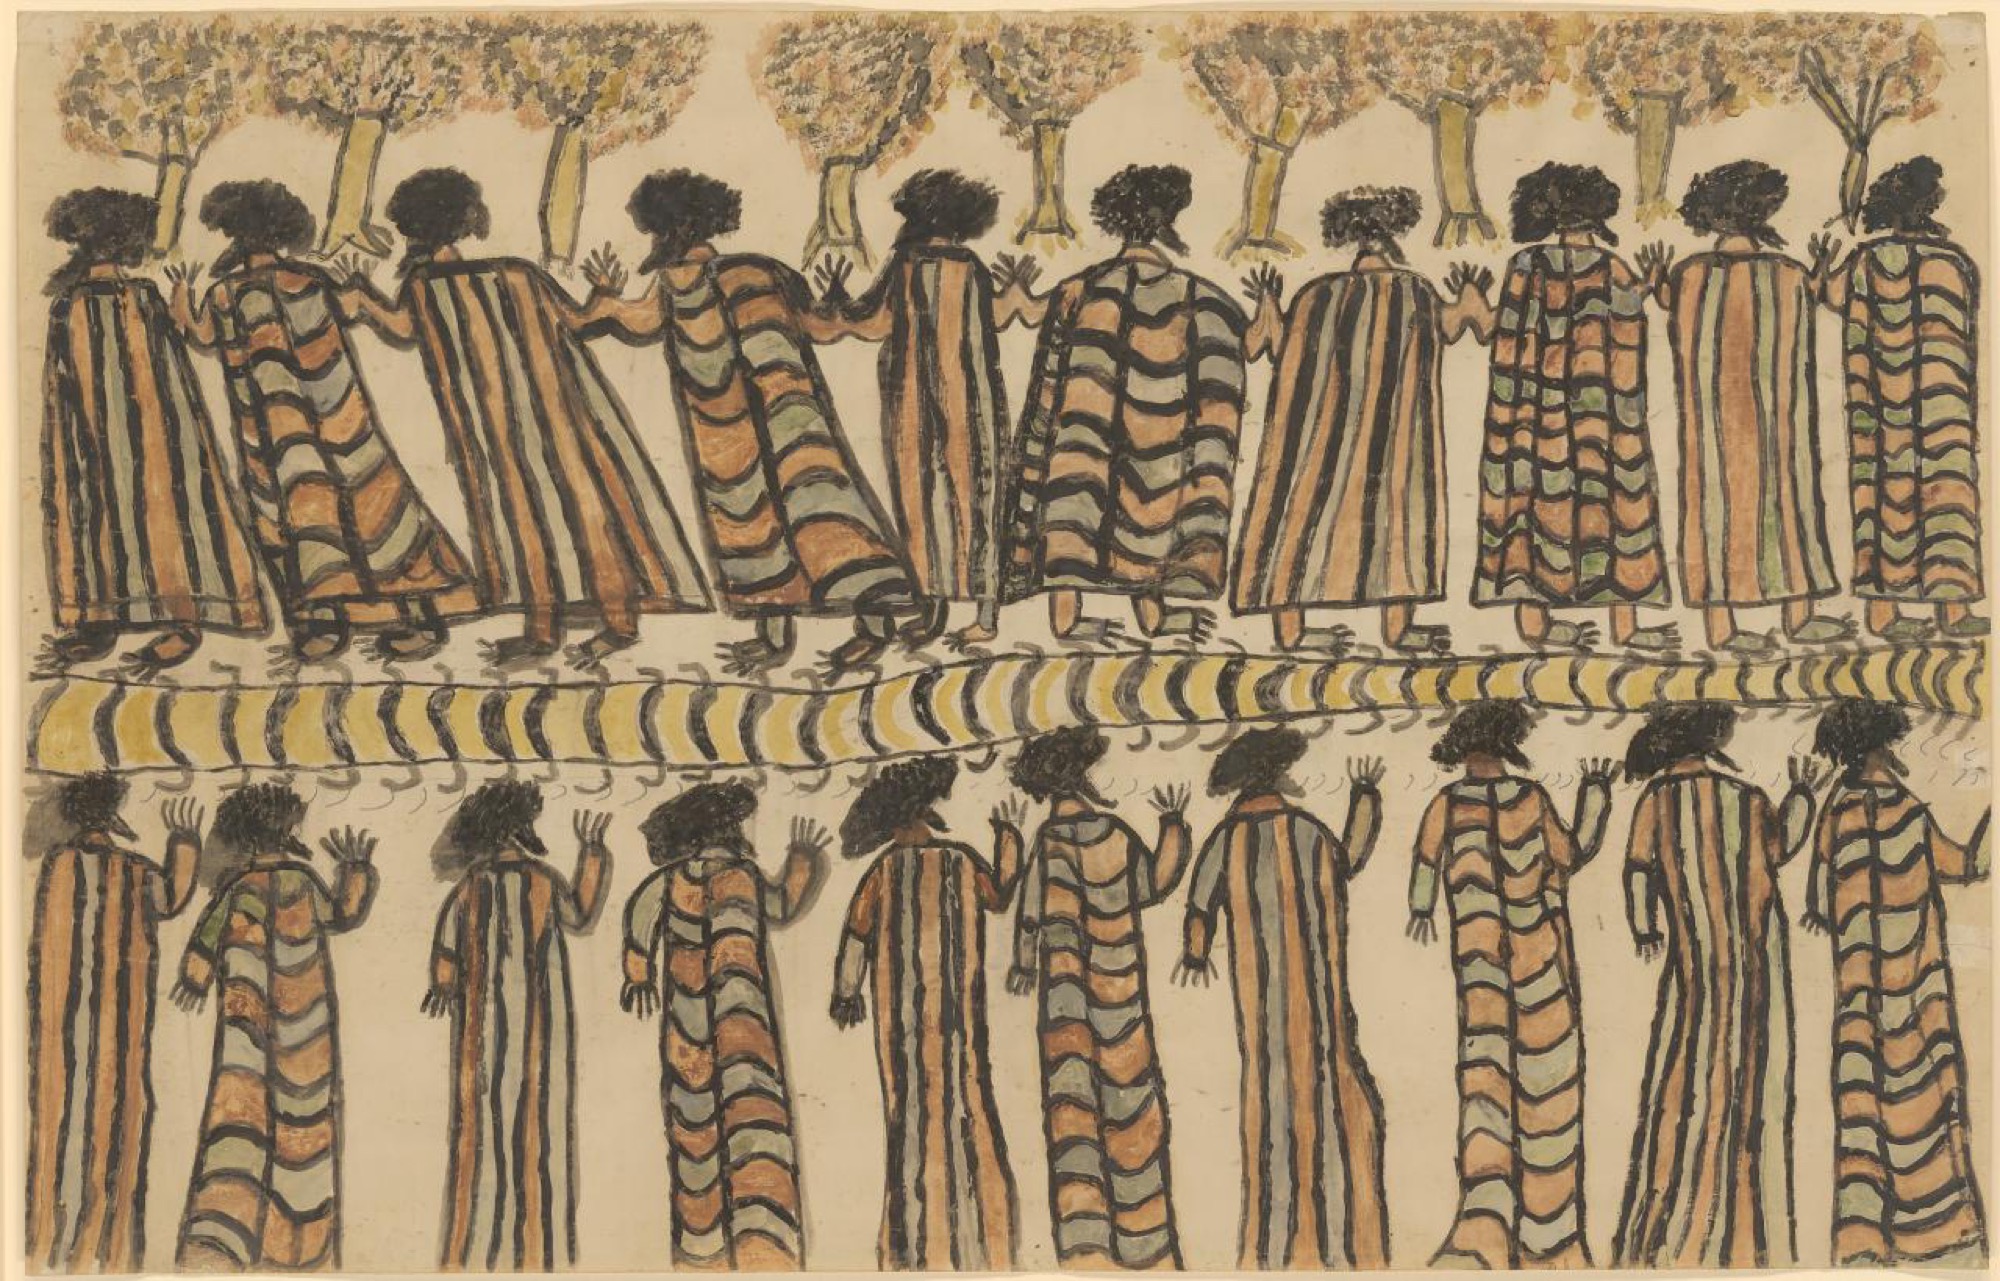 William Barak, <em>Figures in possum skin cloaks</em>, 1898, pencil, wash, charcoal solution, gouache and earth pigments on paper, 57.0 × 88.8 cm (image and sheet). Collection: National Gallery of Victoria, Melbourne.